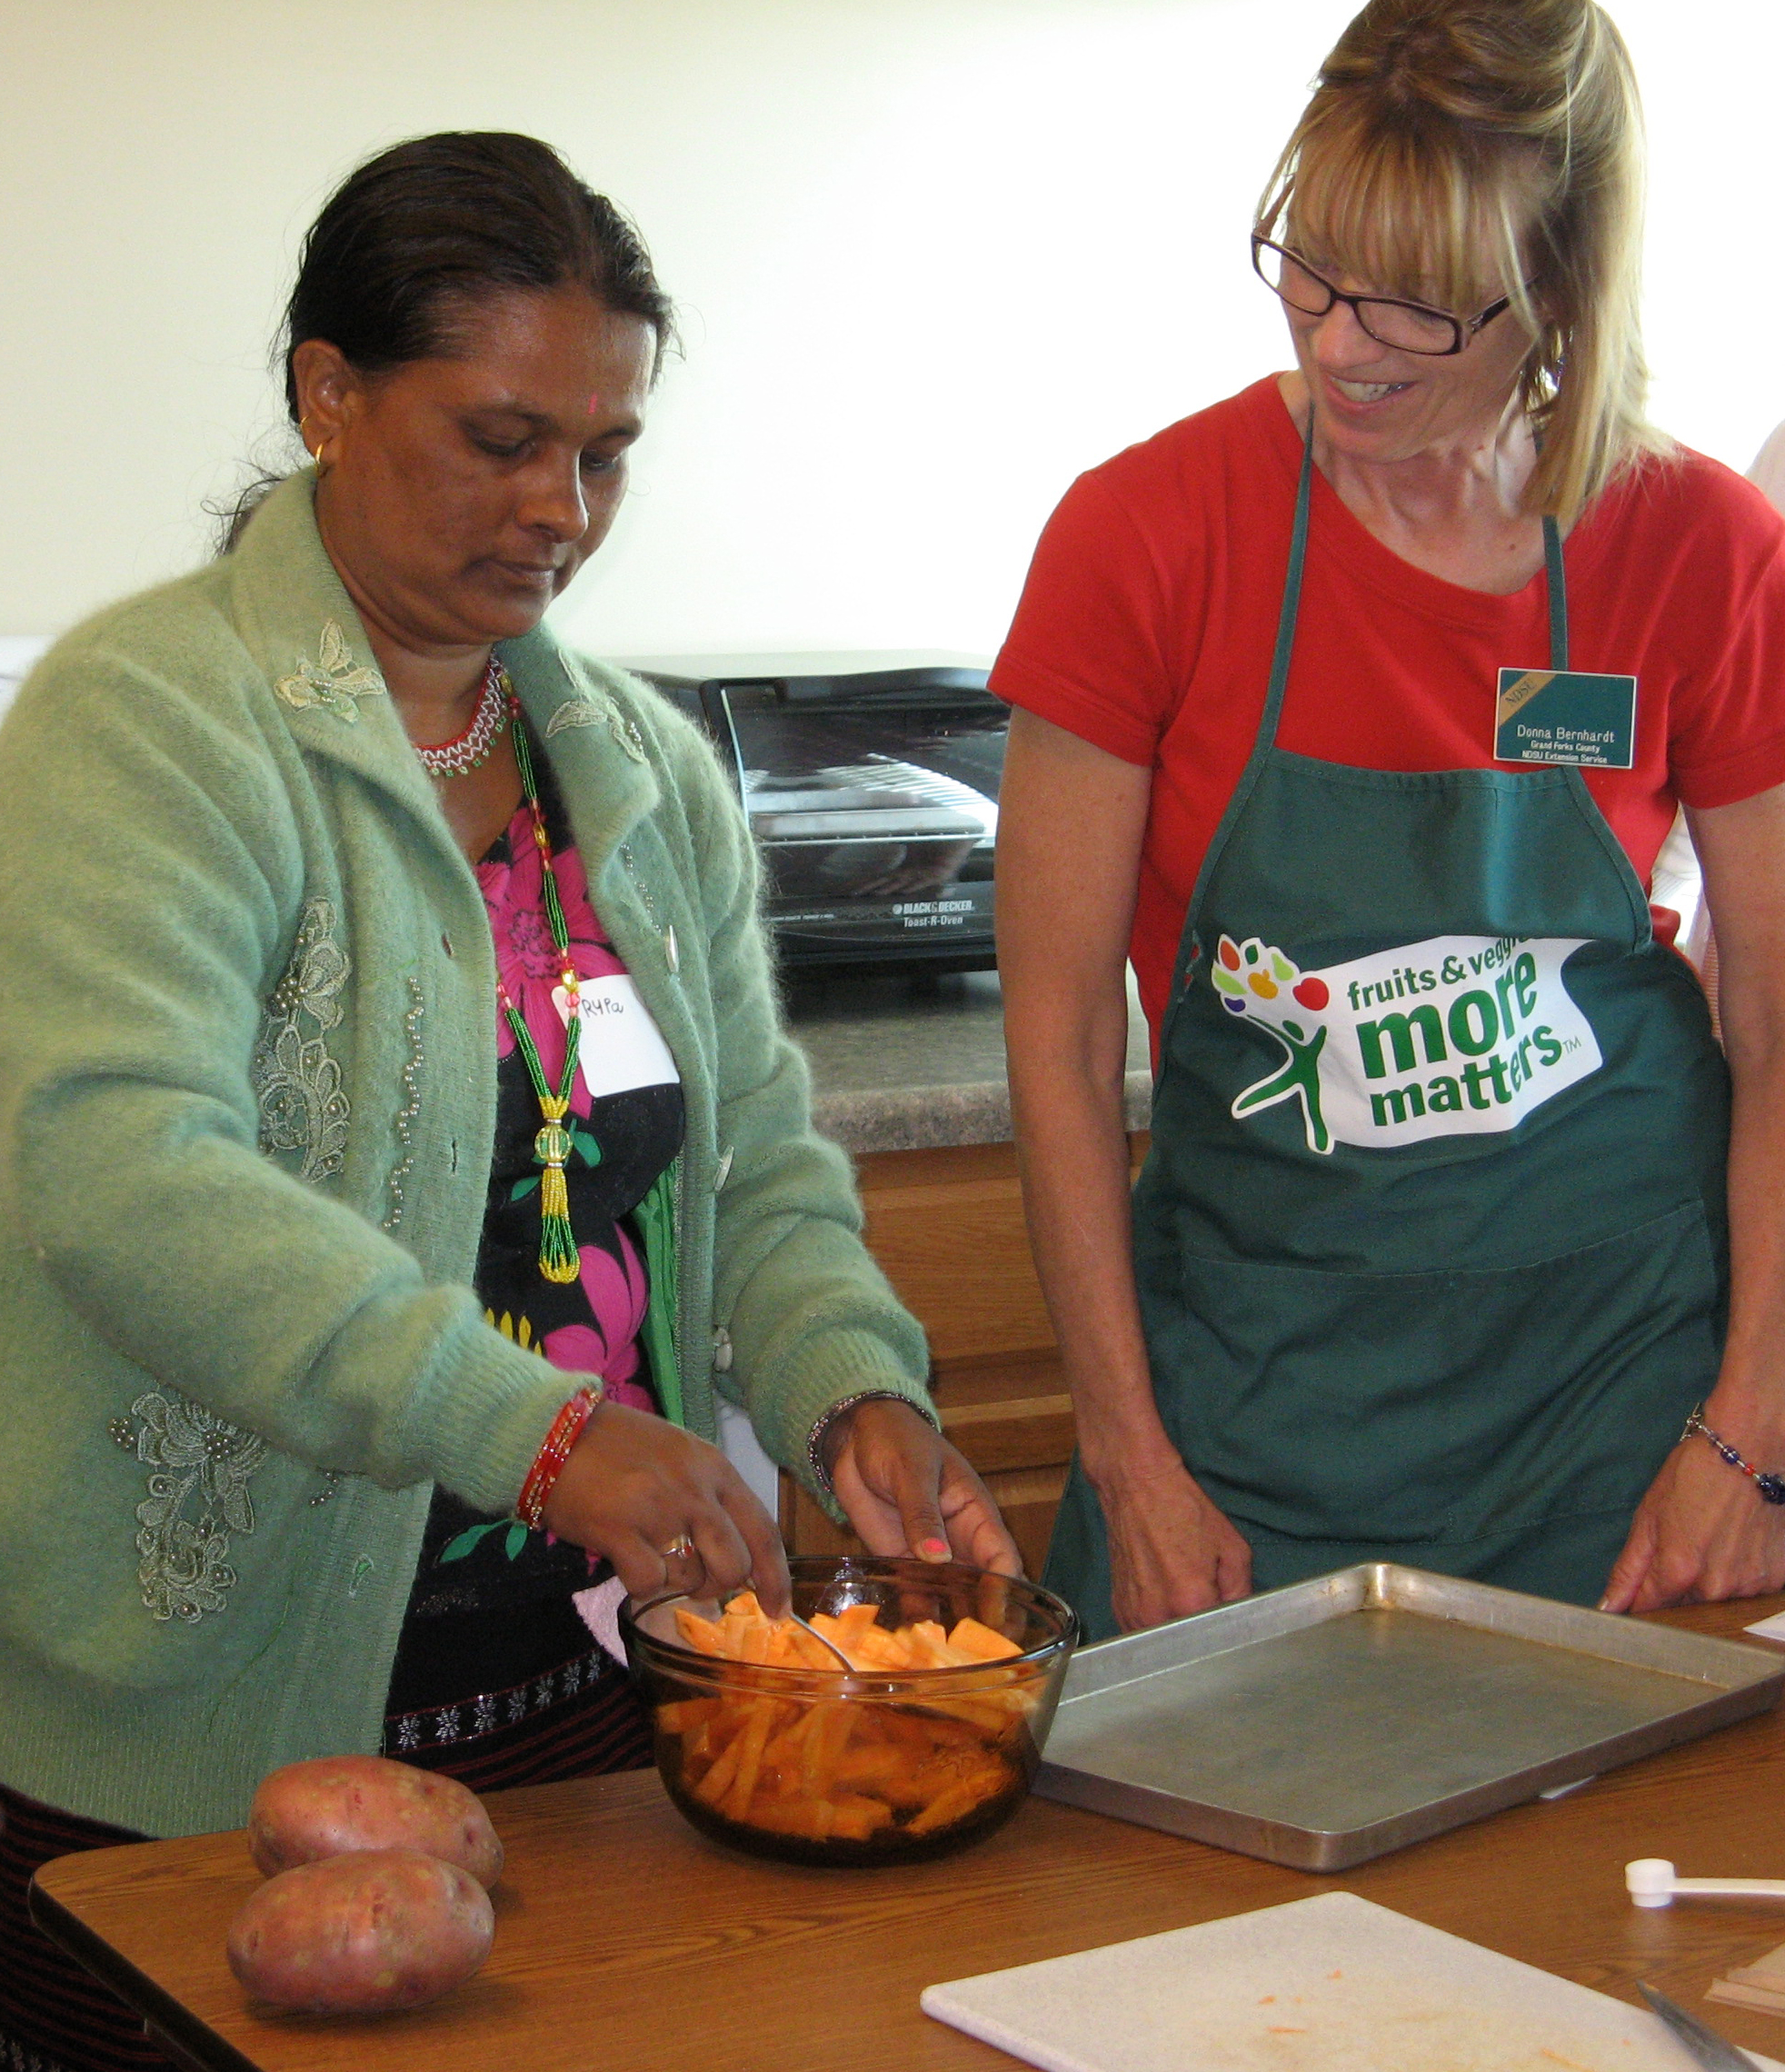 Grand Forks County Extension agent Donna Bernhardt, right, helps a woman make baked sweet potato fries during a cooking class for new Americans.